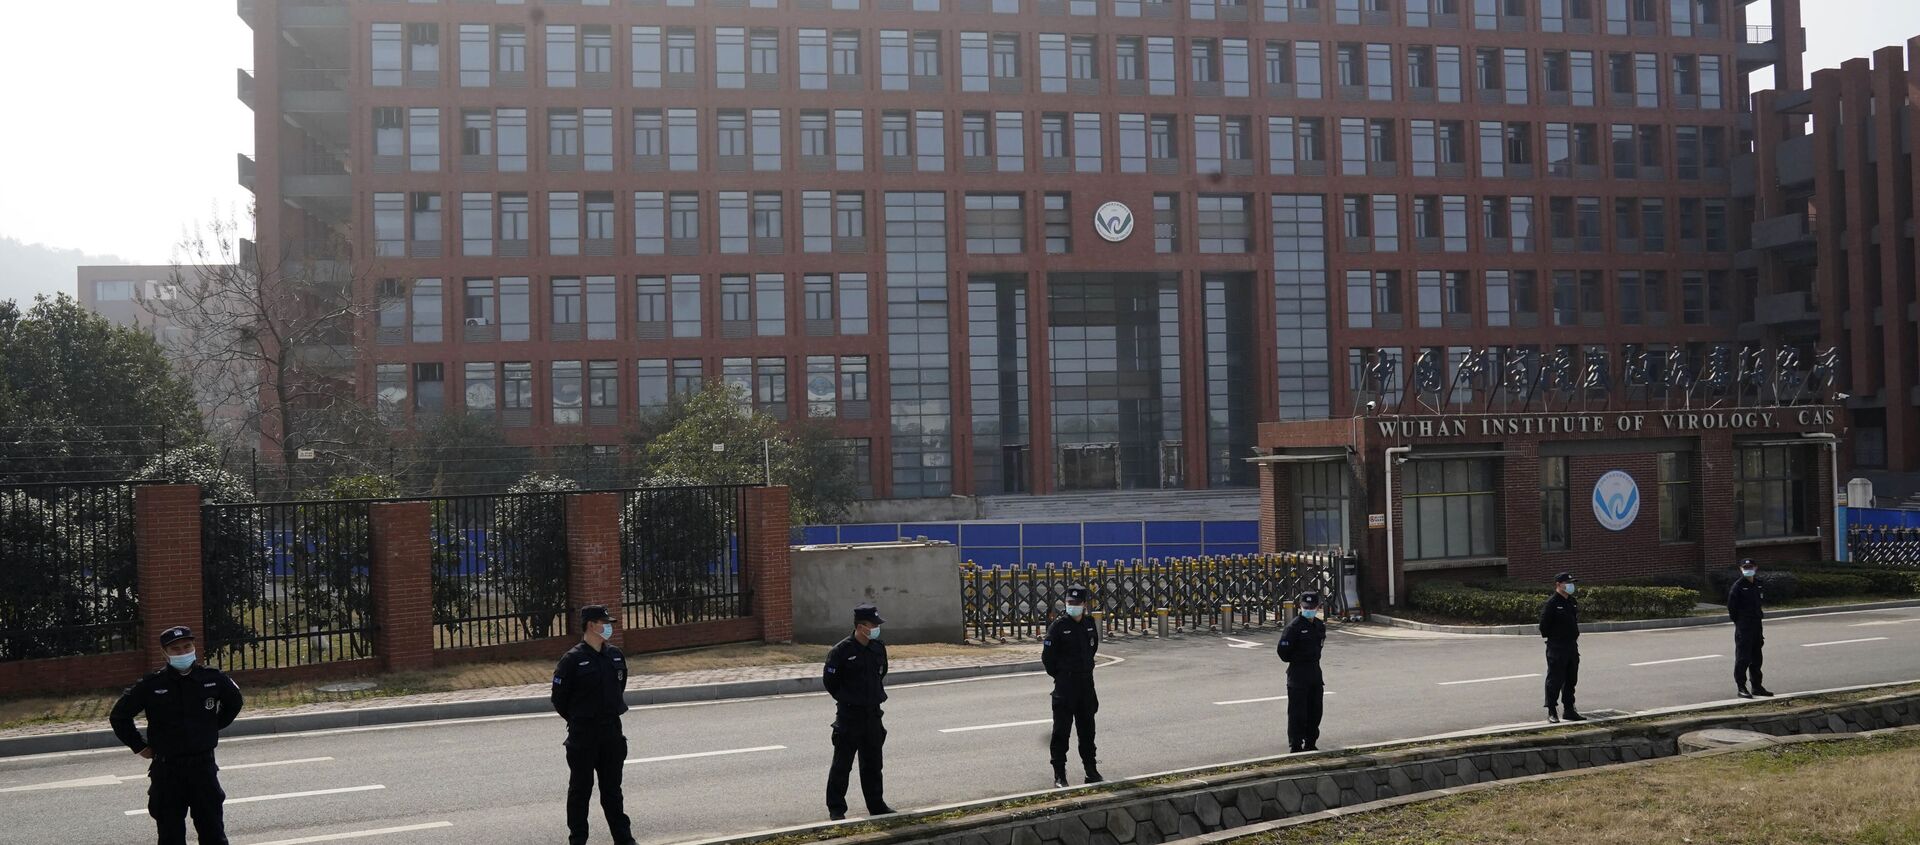 Security personnel gather near the entrance to the Wuhan Institute of Virology during a visit by the World Health Organization team in Wuhan in China's Hubei province on Wednesday, Feb. 3, 2021.  - Sputnik International, 1920, 11.03.2021